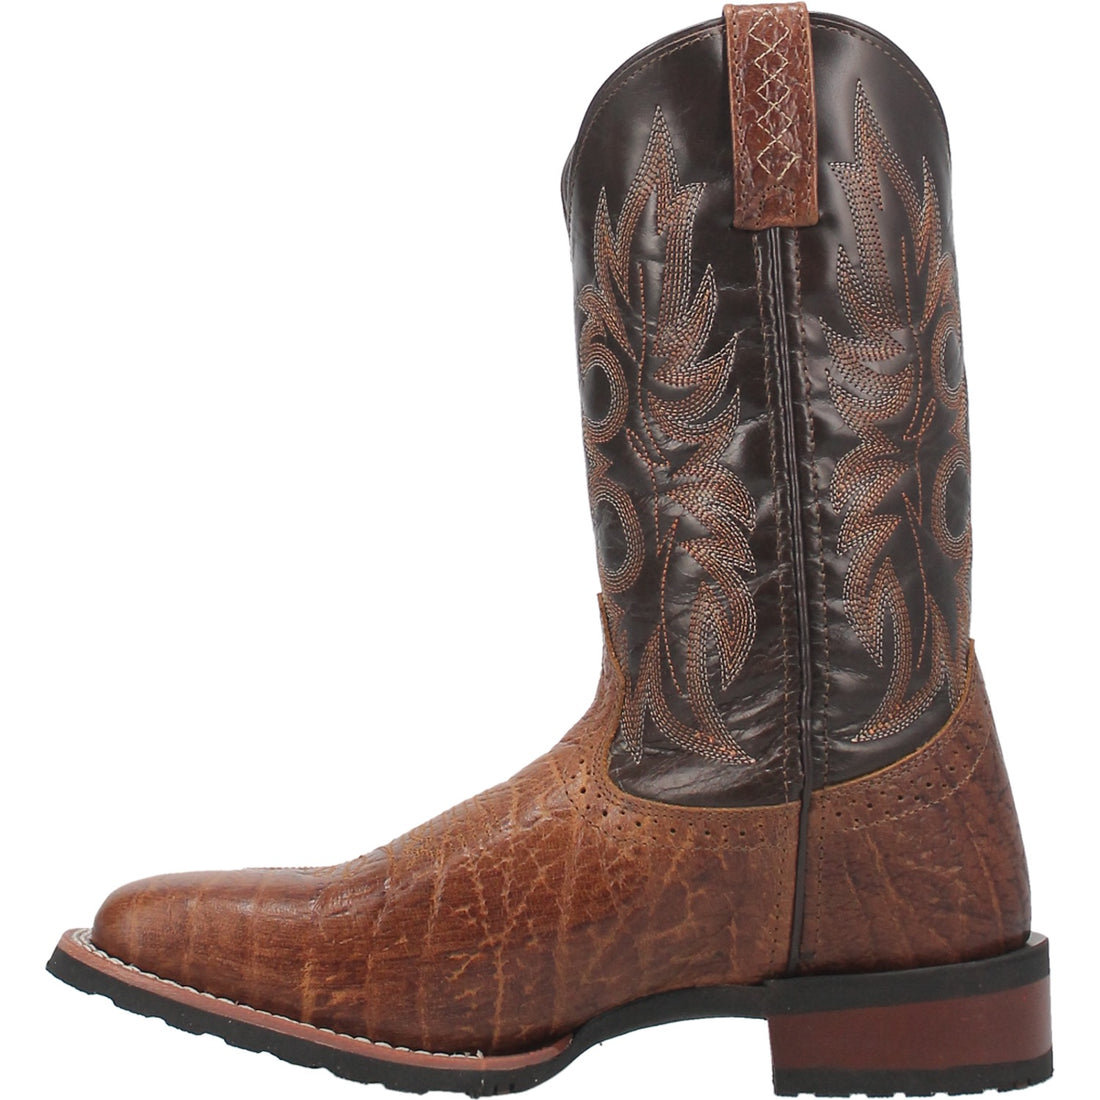 BROKEN BOW LEATHER BOOT Preview #3